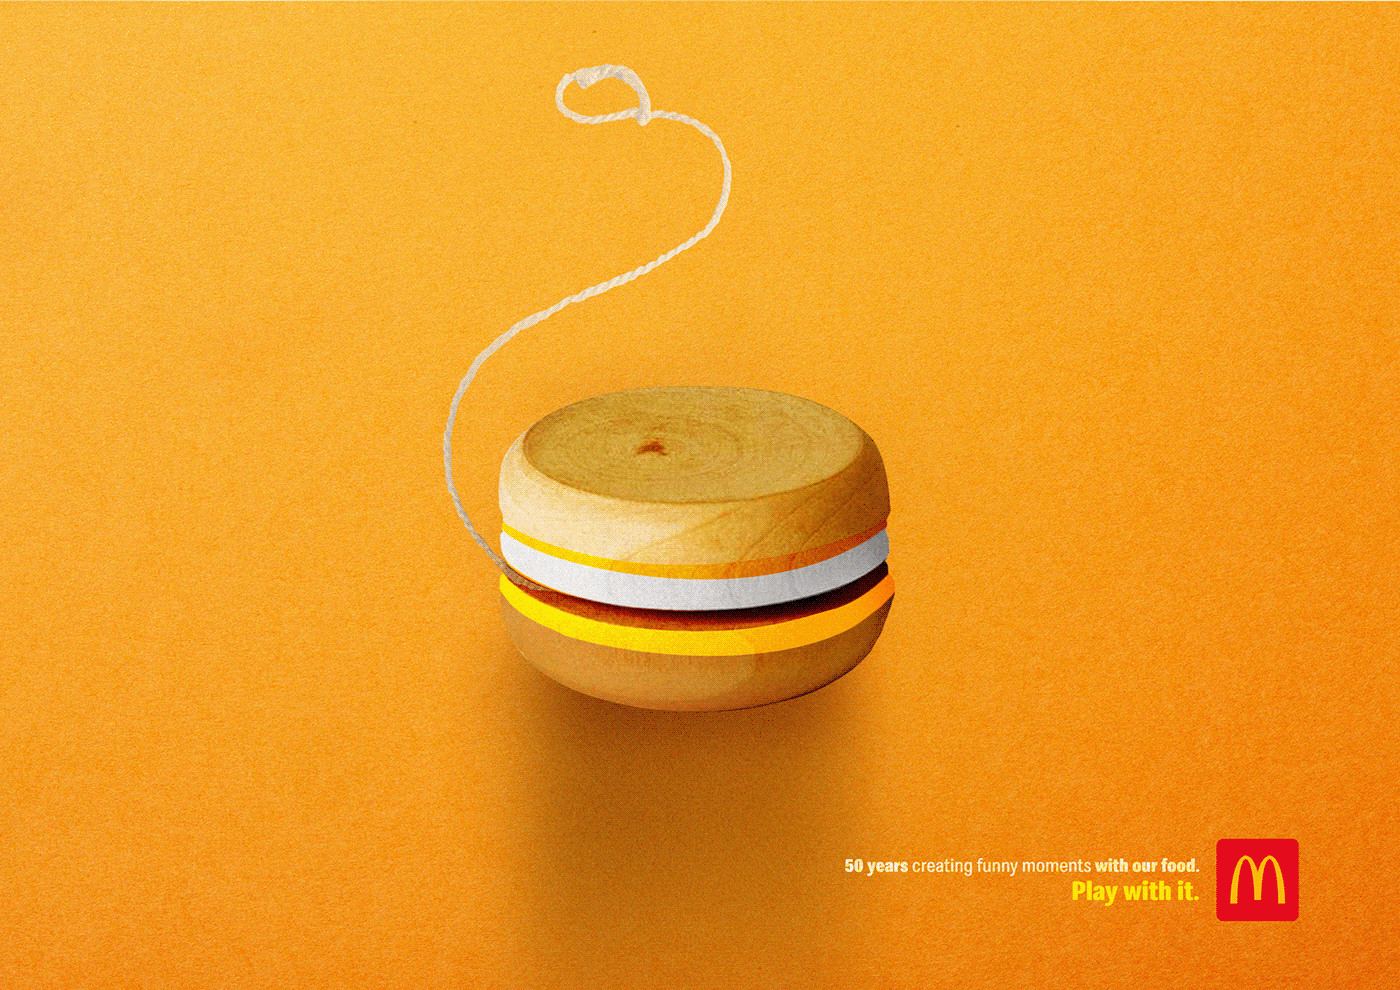 McDonalds print Young lions design toy product concept artwork Outdoor